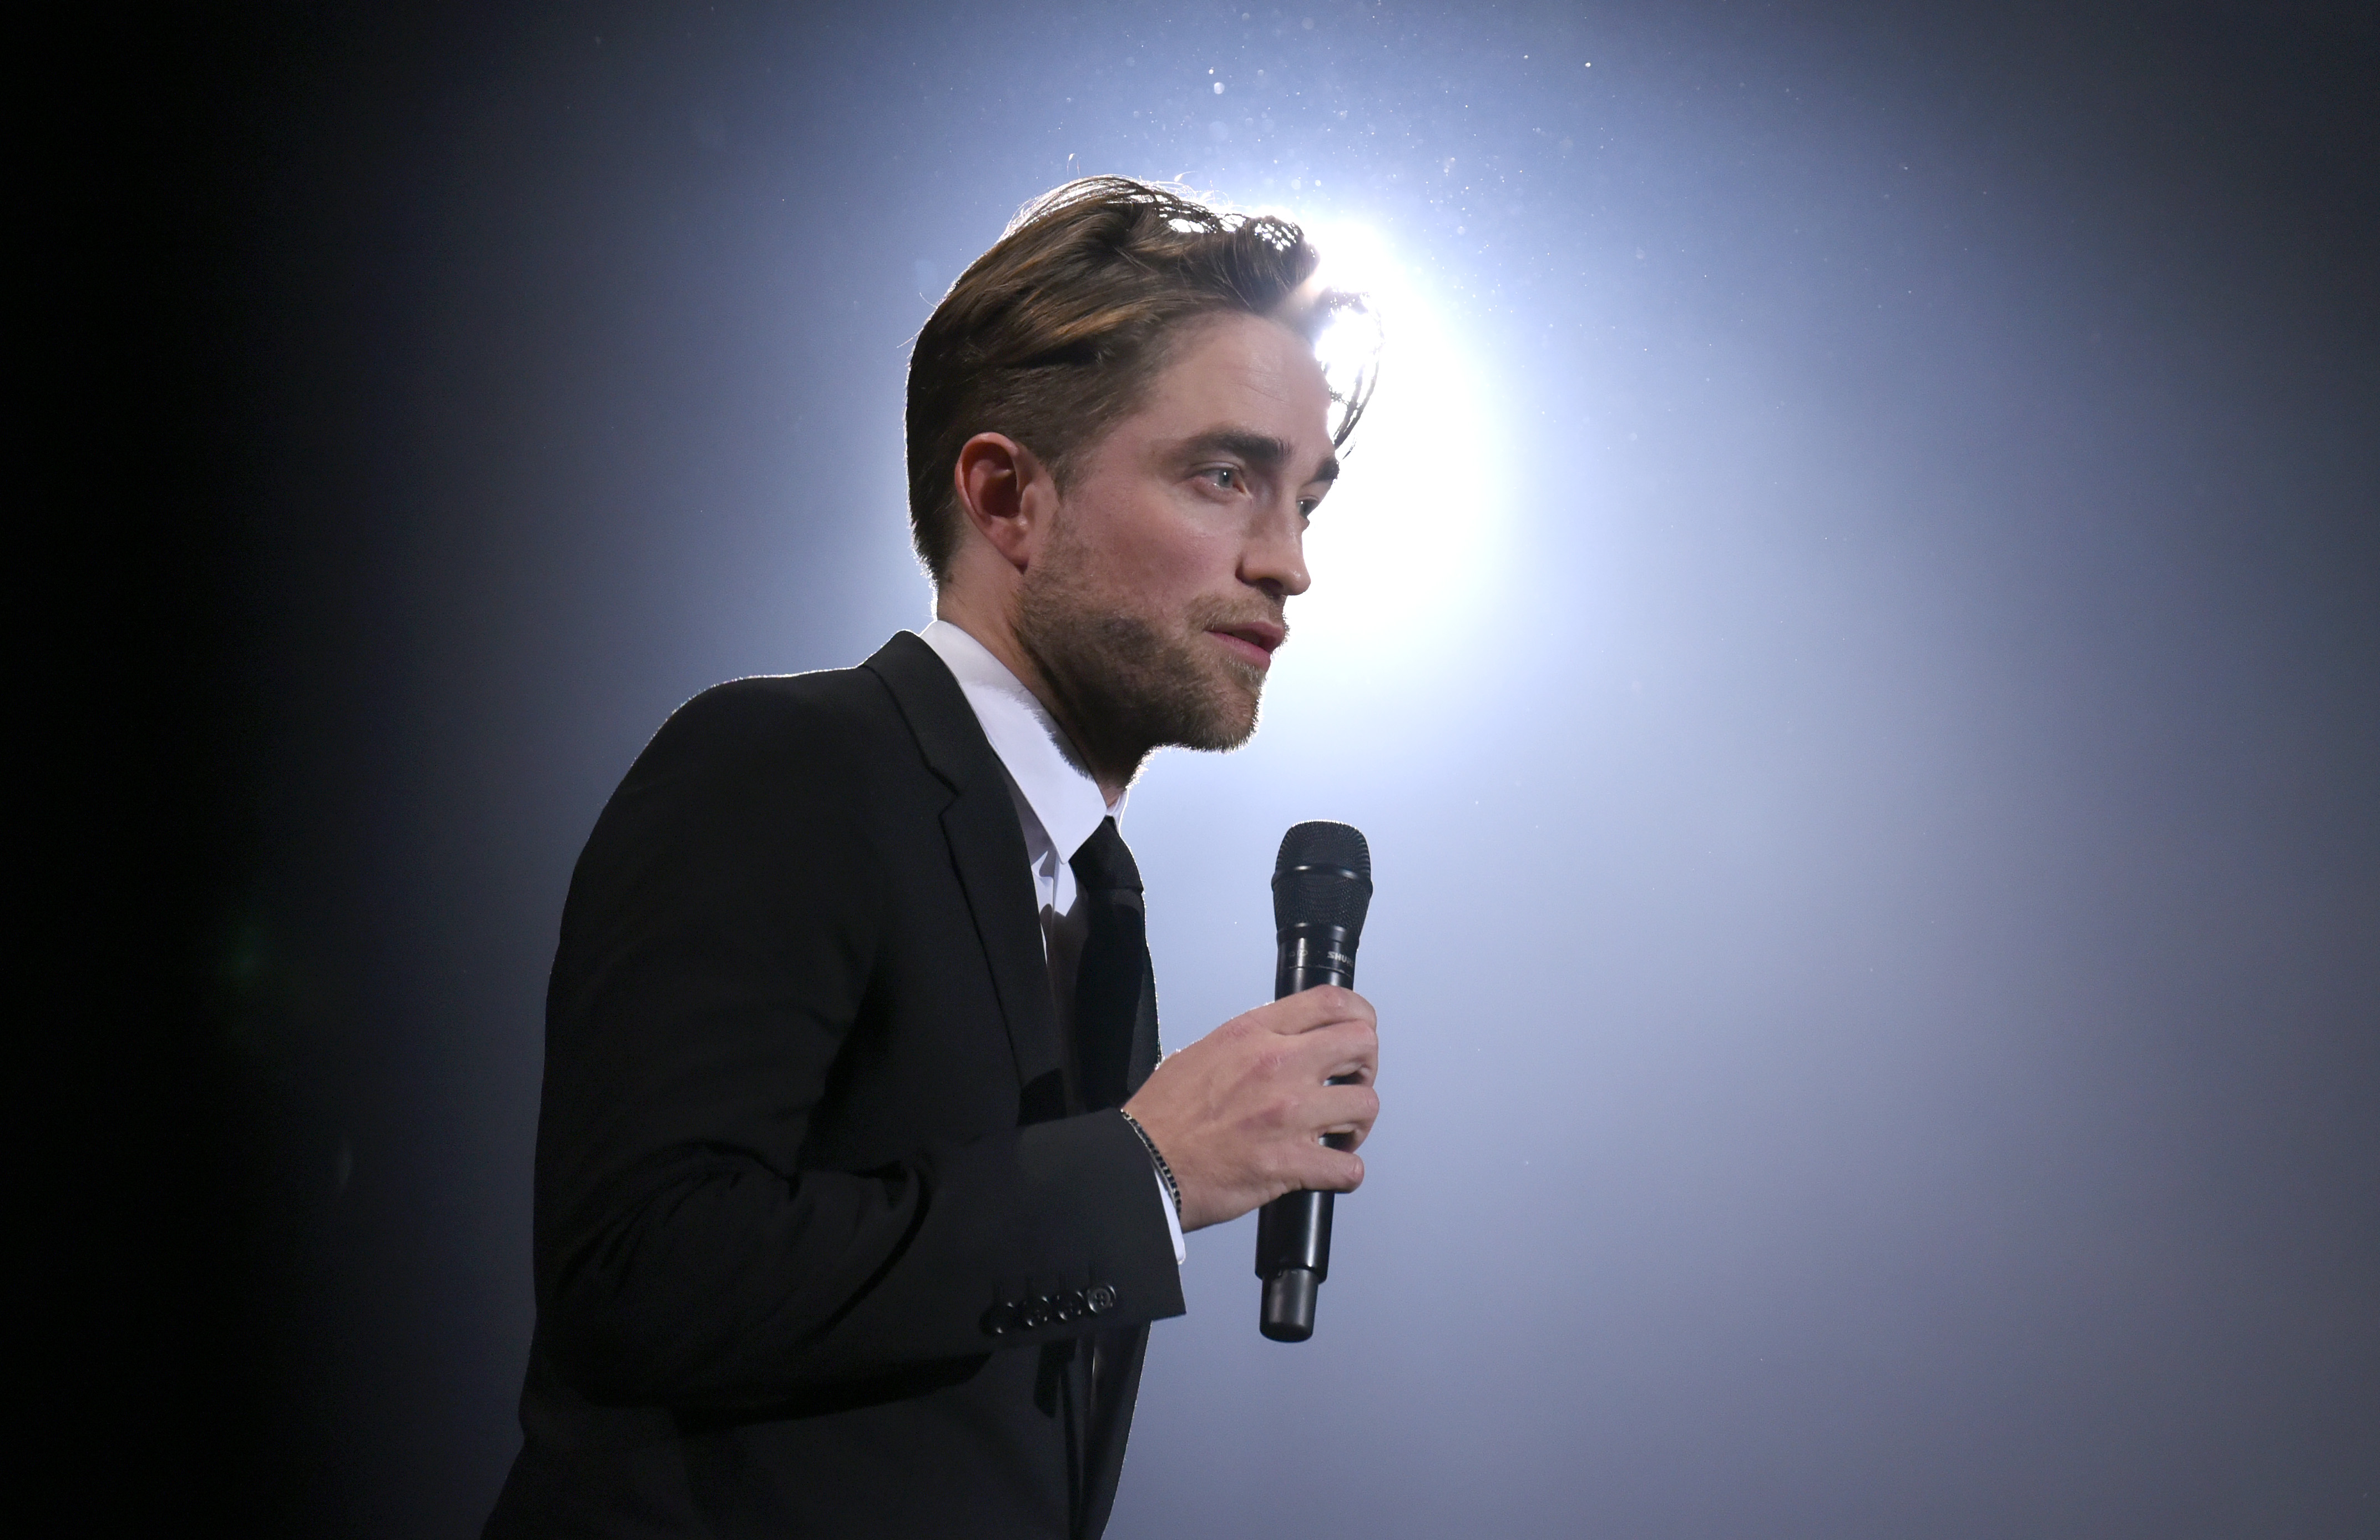 Robert Pattinson, who is featured in the DC FanDome 2021 trailer, wears a black suit and tie and holds a microphone.